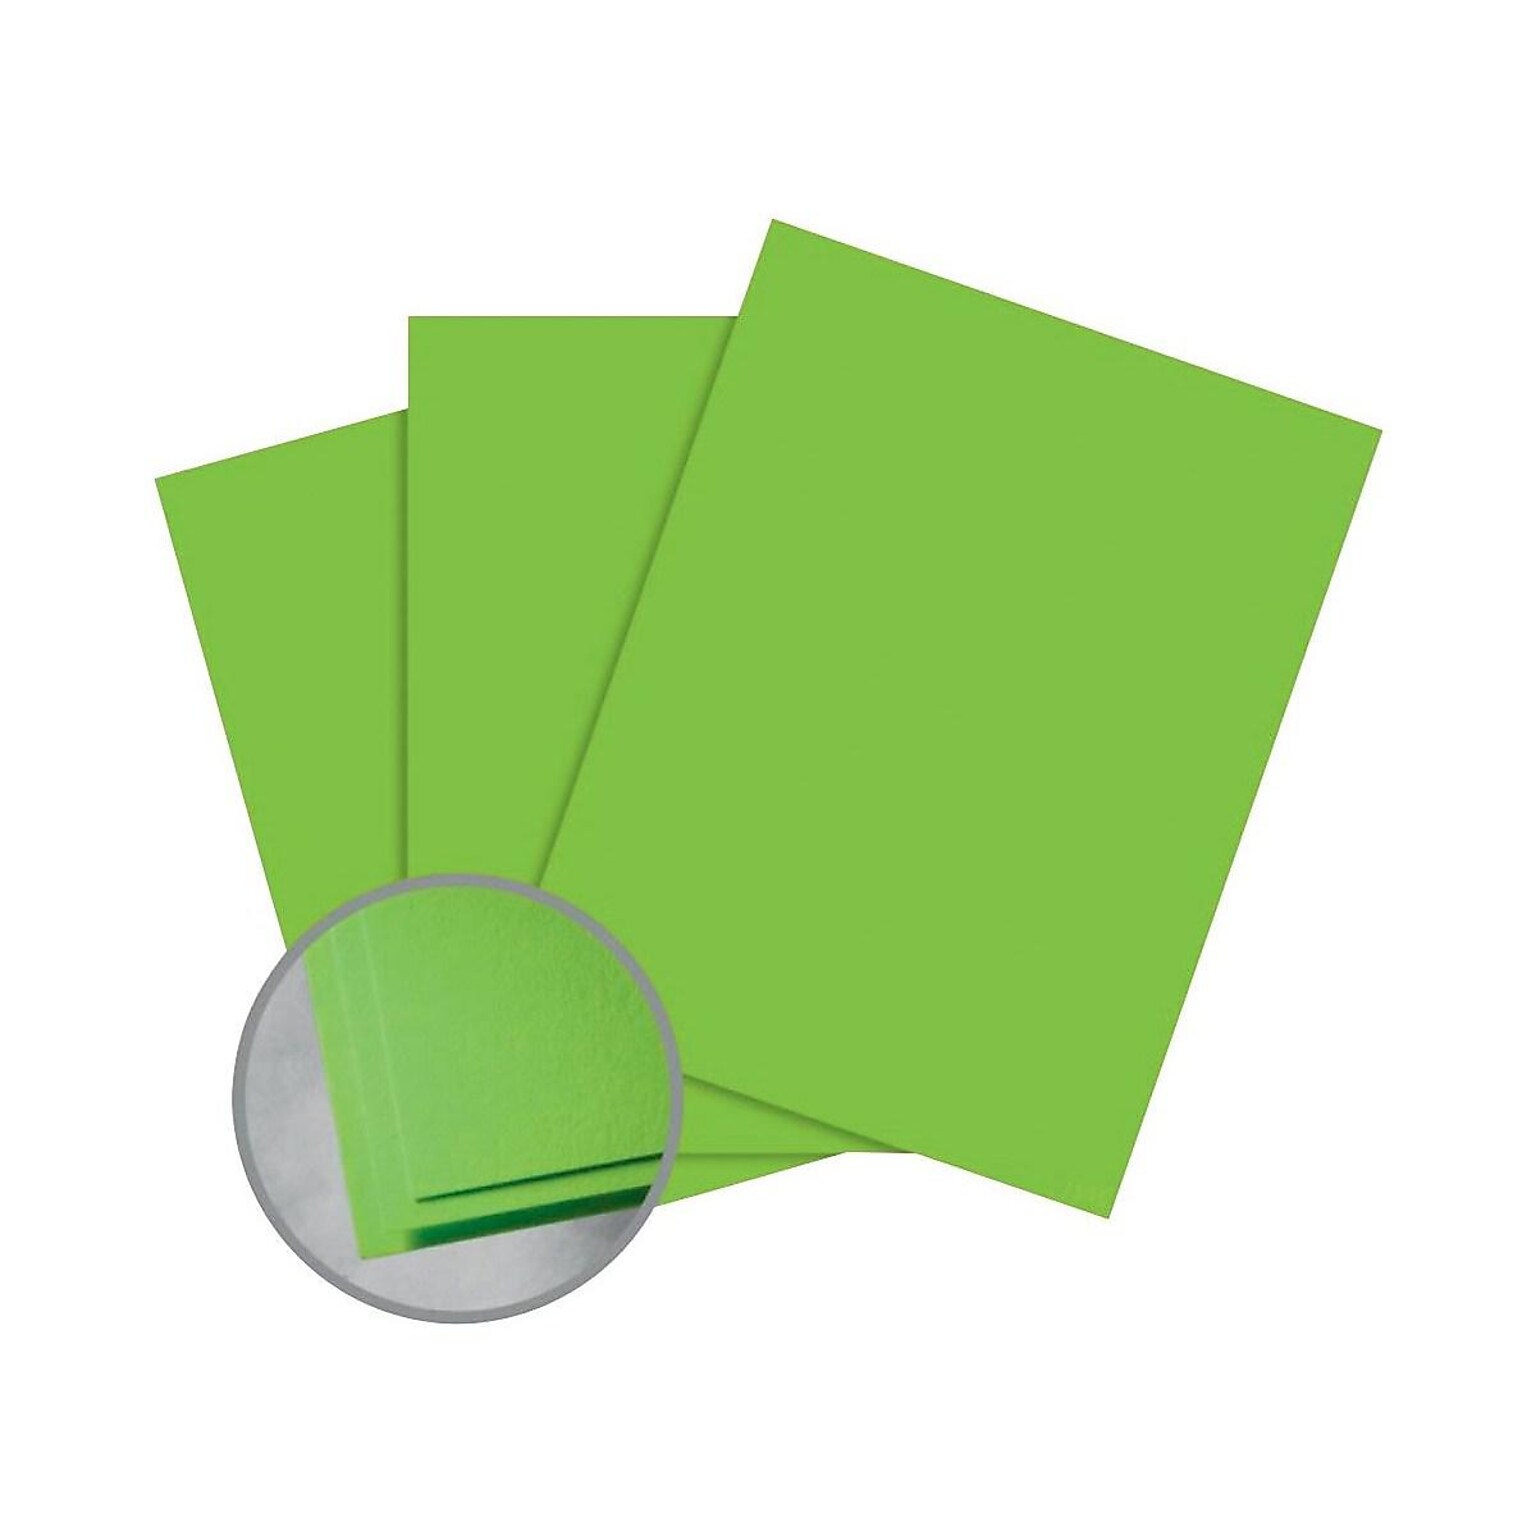 Neenah Astrobrights Smooth Colored Paper, 24 lbs, 8.5 x 11, Terra Green, 5000 Sheets/Carton (22581)